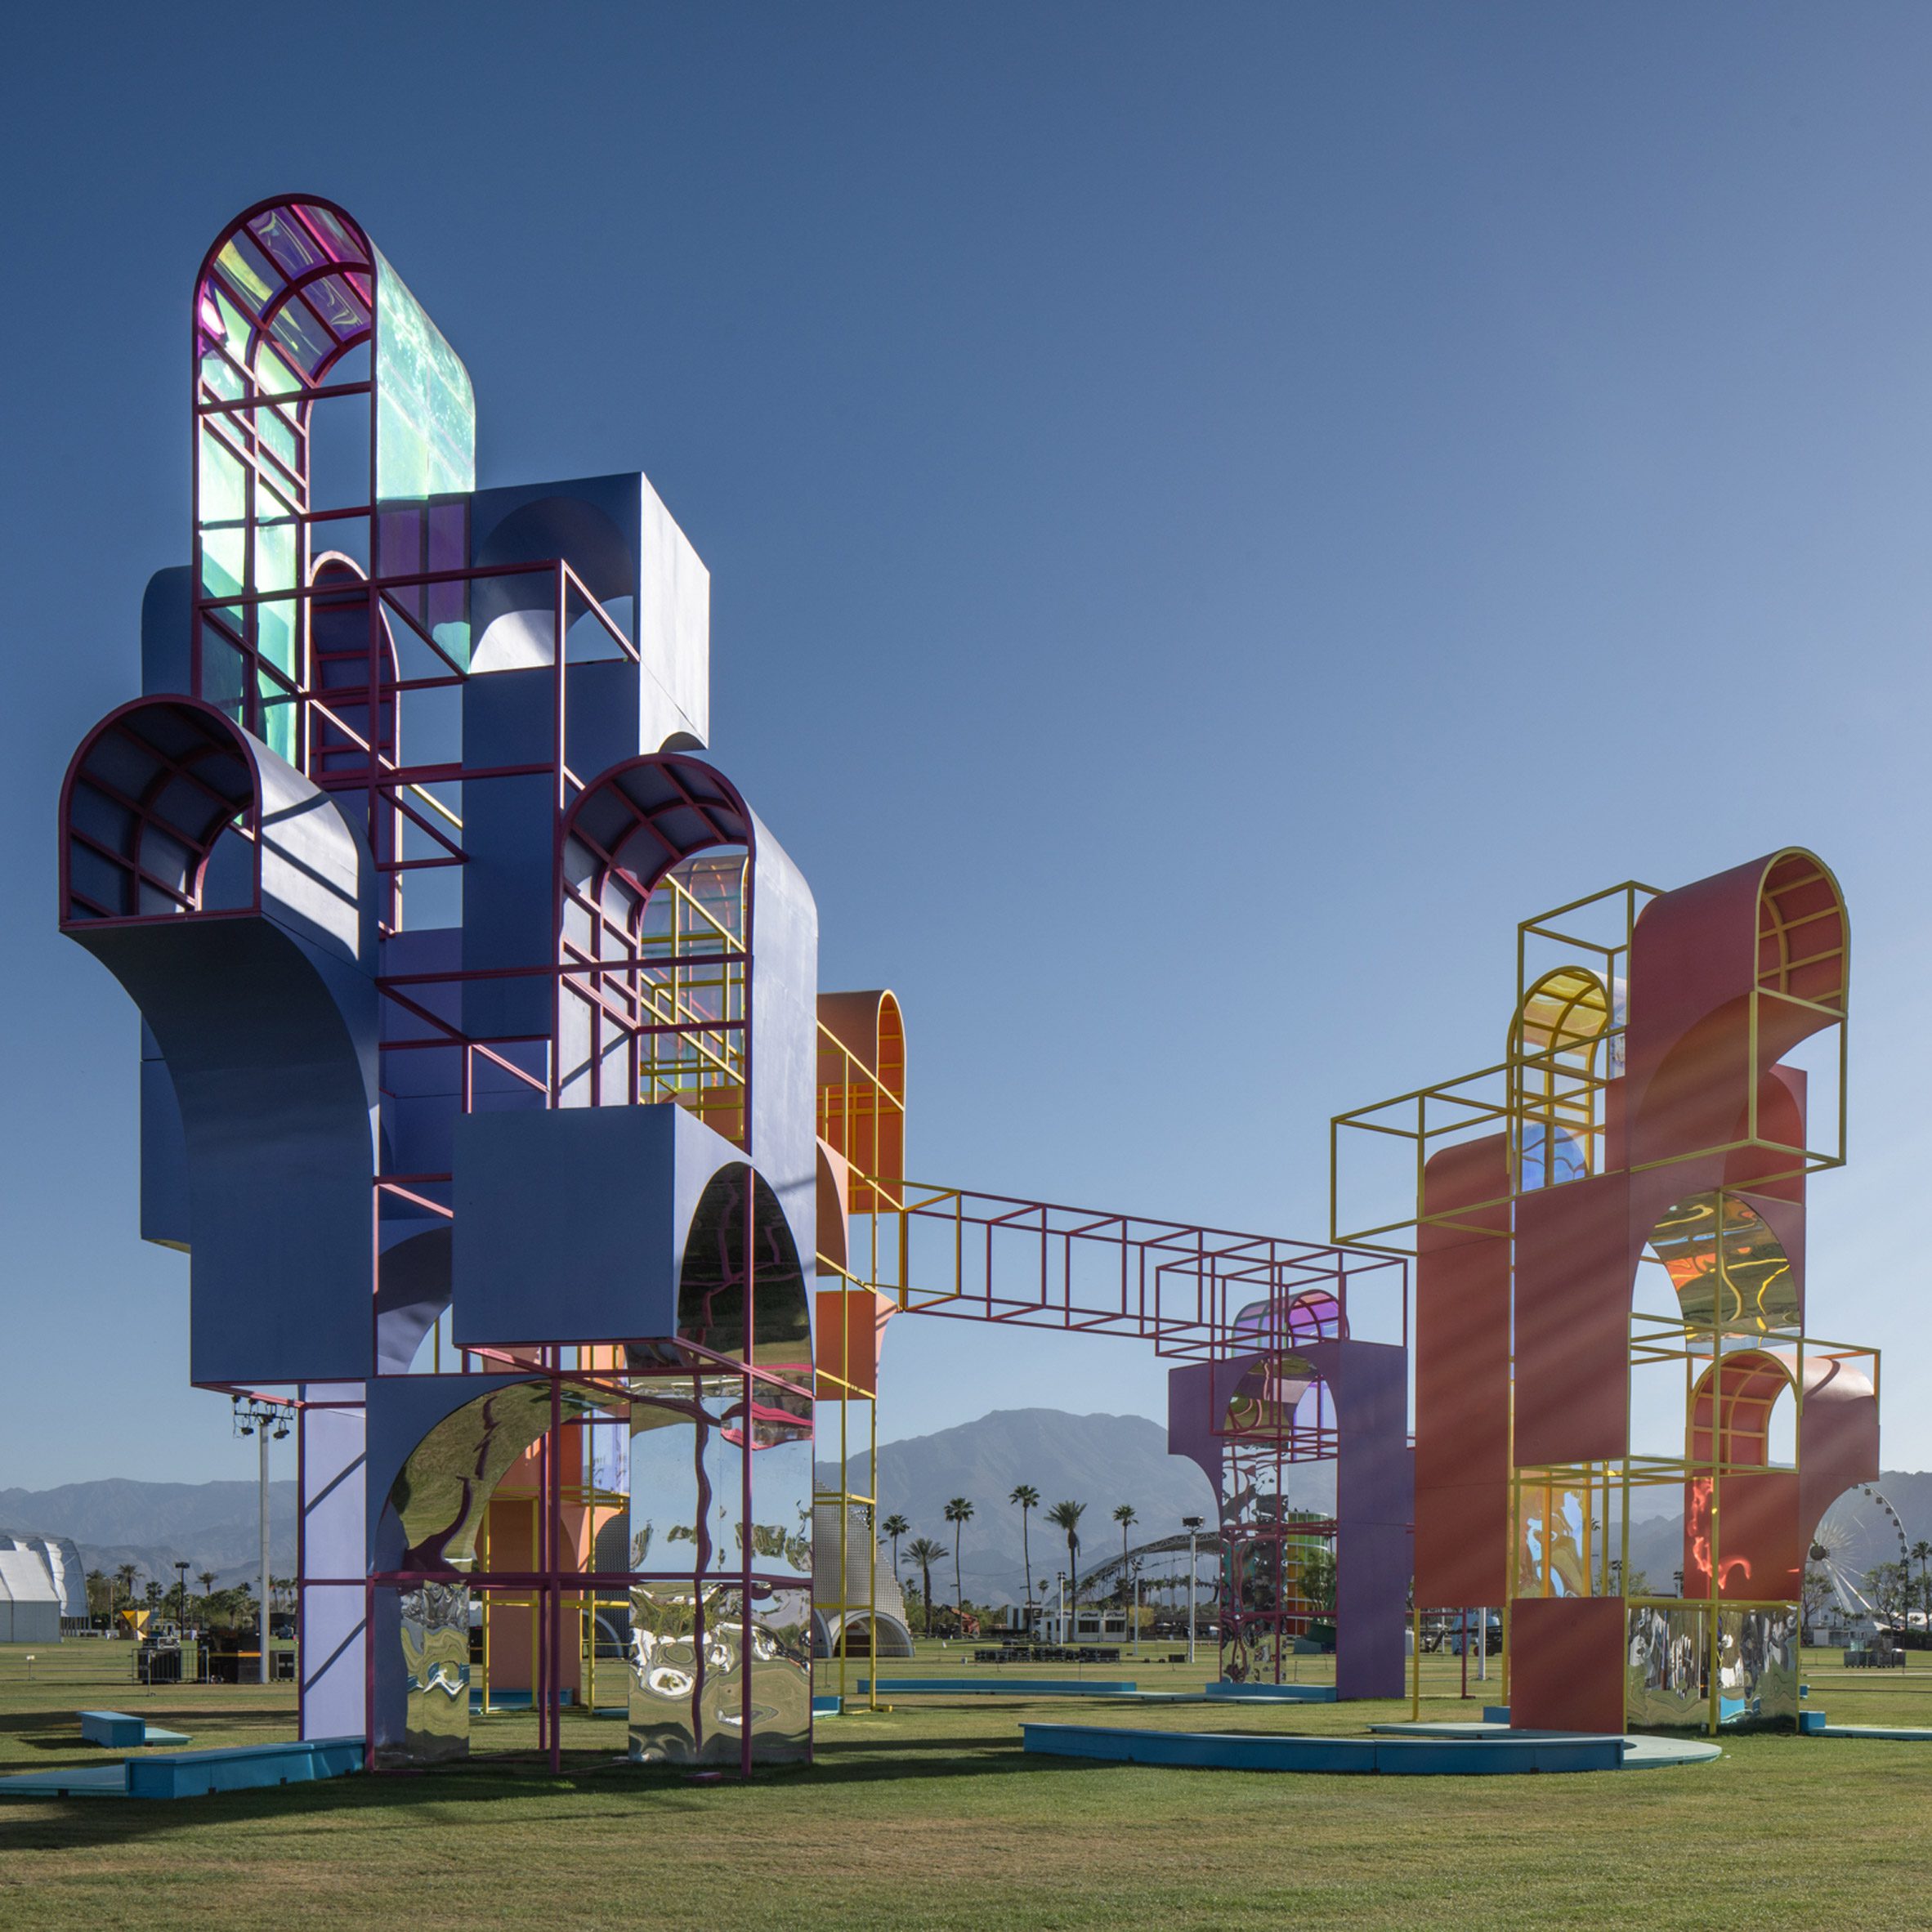 Playground installation by Architensions for Coachella festival, USA, 2022